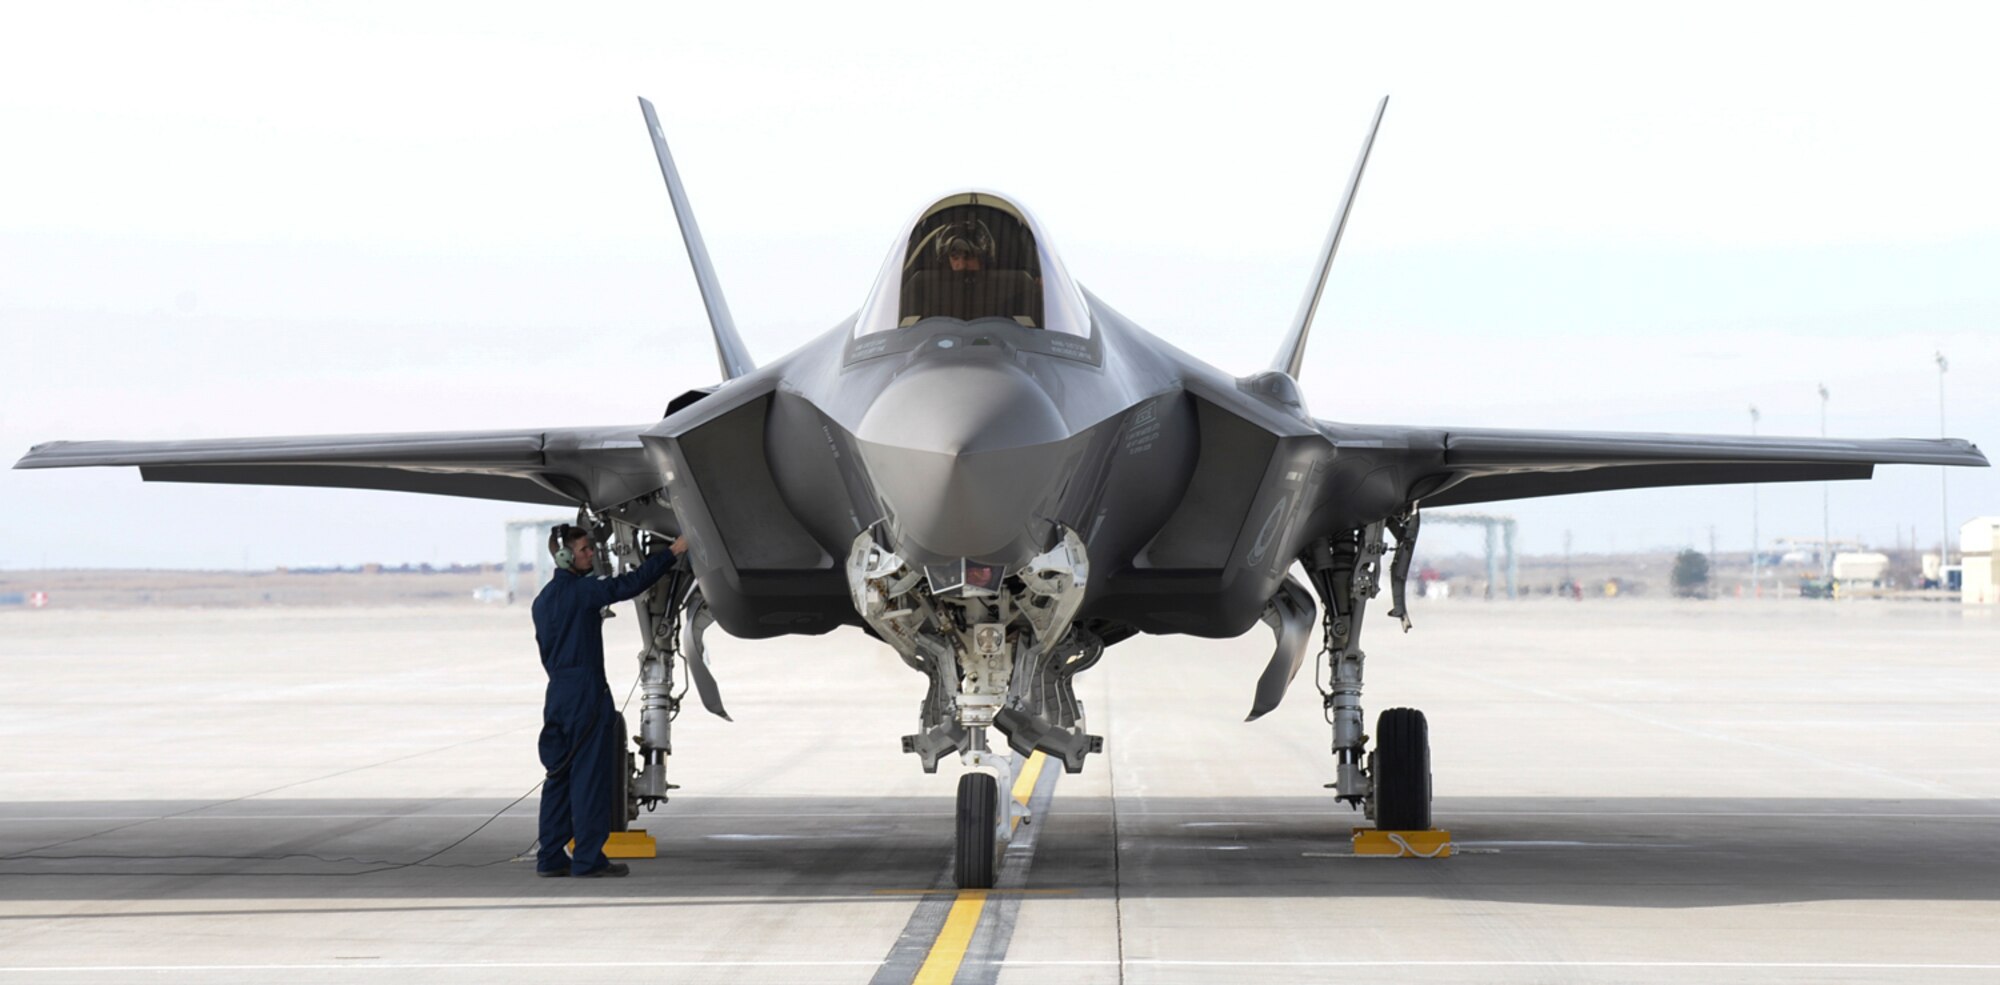 An airman prepares an F-35A for take-off at Mountain Home Air Force Base, Idaho, Feb. 12, 2016. The aircraft is here to validate its capability to deploy as part of an operational test by the 31st Test and Evaluation Squadron from Edwards AFB, Calif. (U.S. Air Force photo by Airman 1st Class Jessica H. Evans/RELEASED)